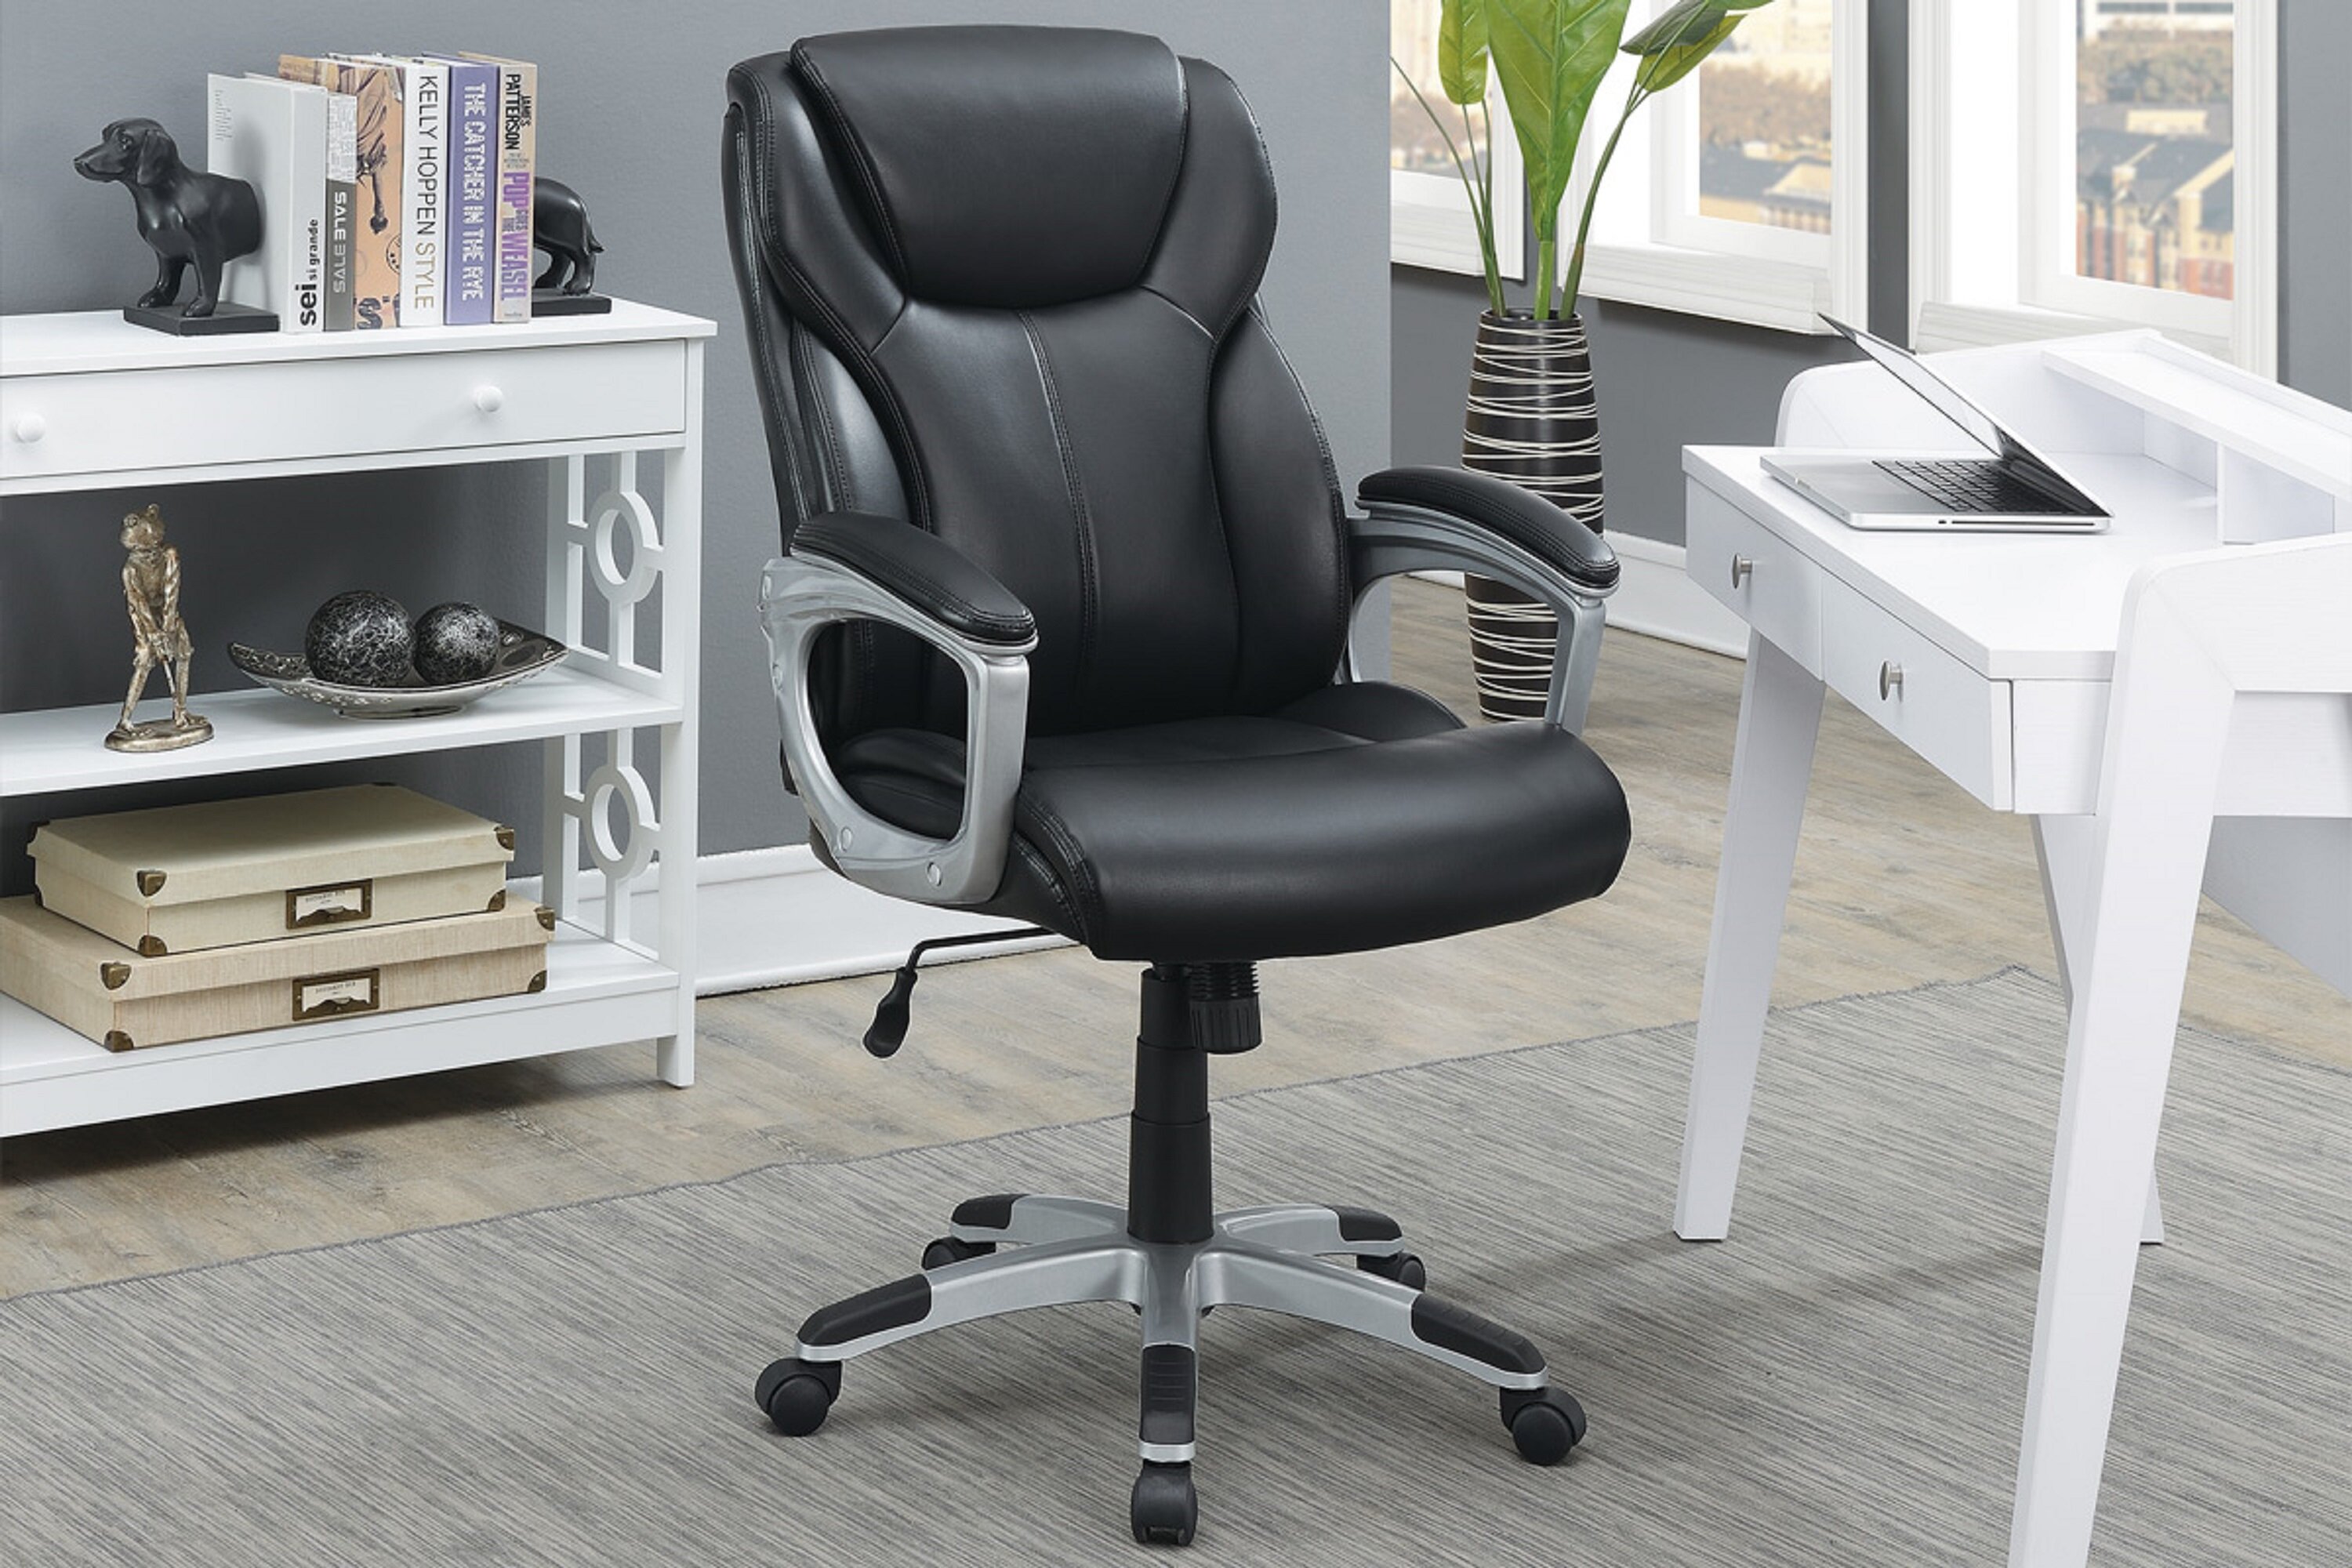 Details about   Home Office Chair  Ergonomic executive Computer Desk Seat Swivel Task Mesh Chair 